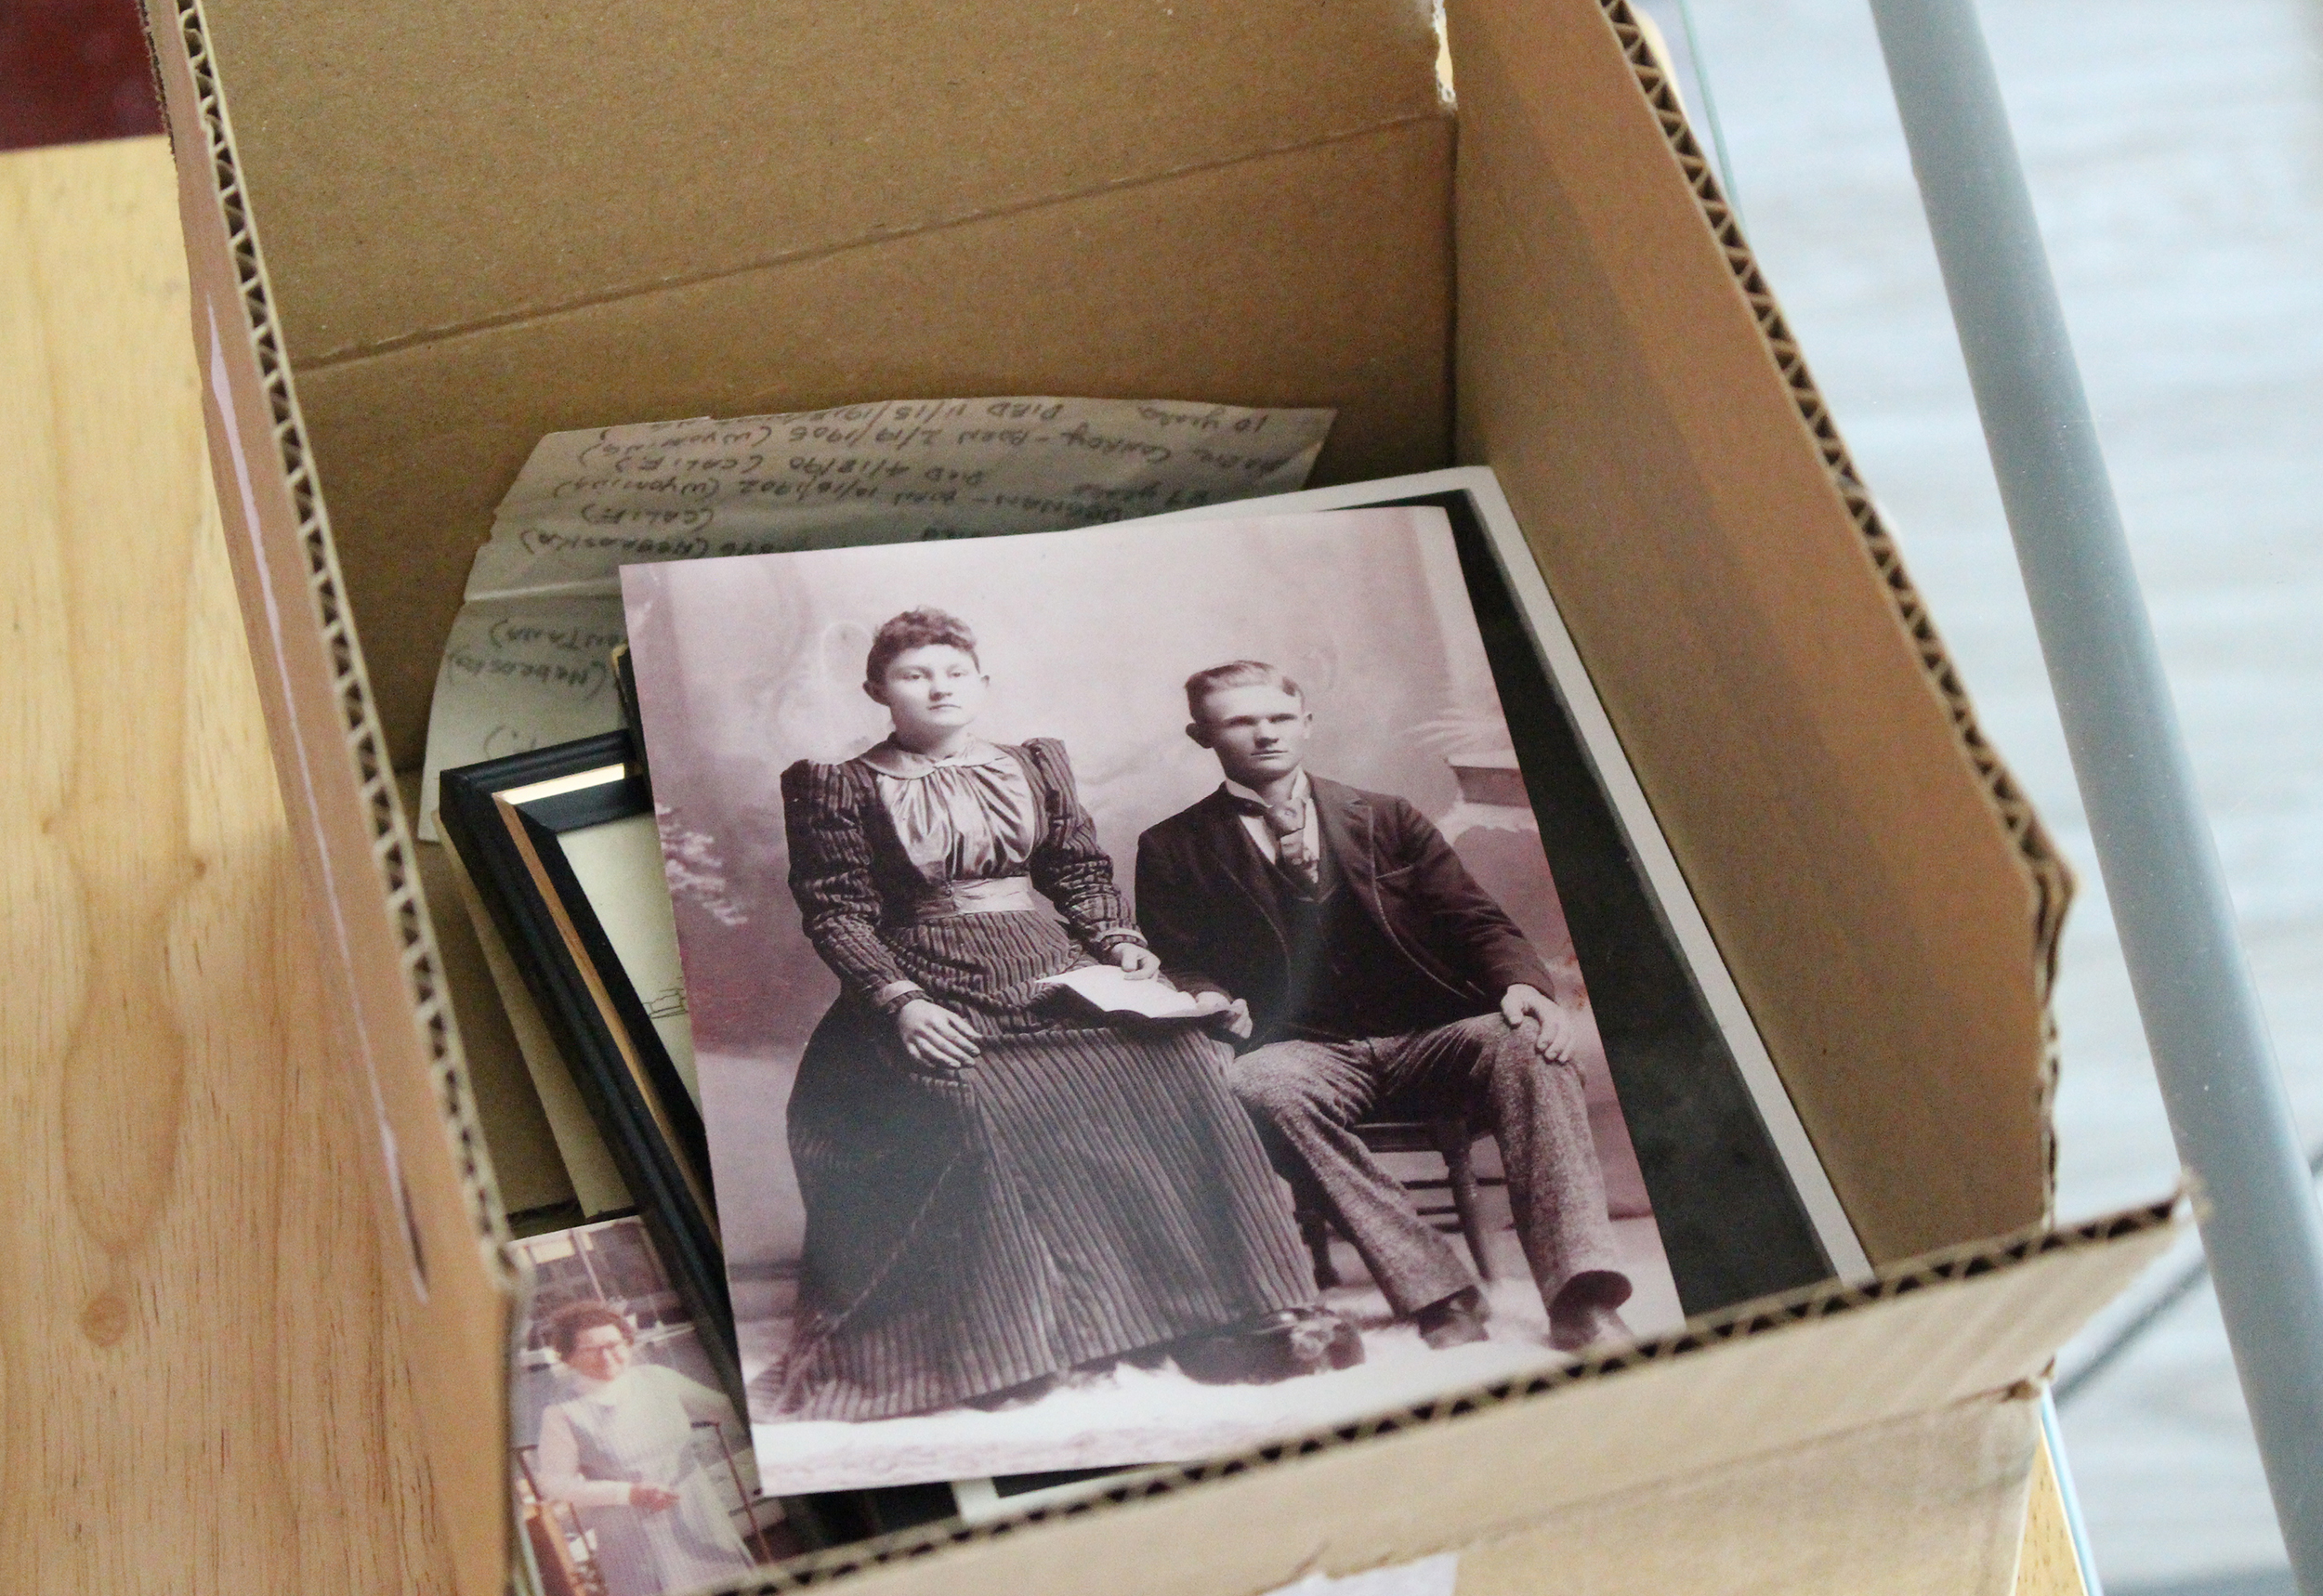 A cardboard box holds several photos and notes. A picture of a man and a woman posing for a portrait is shown at the top.